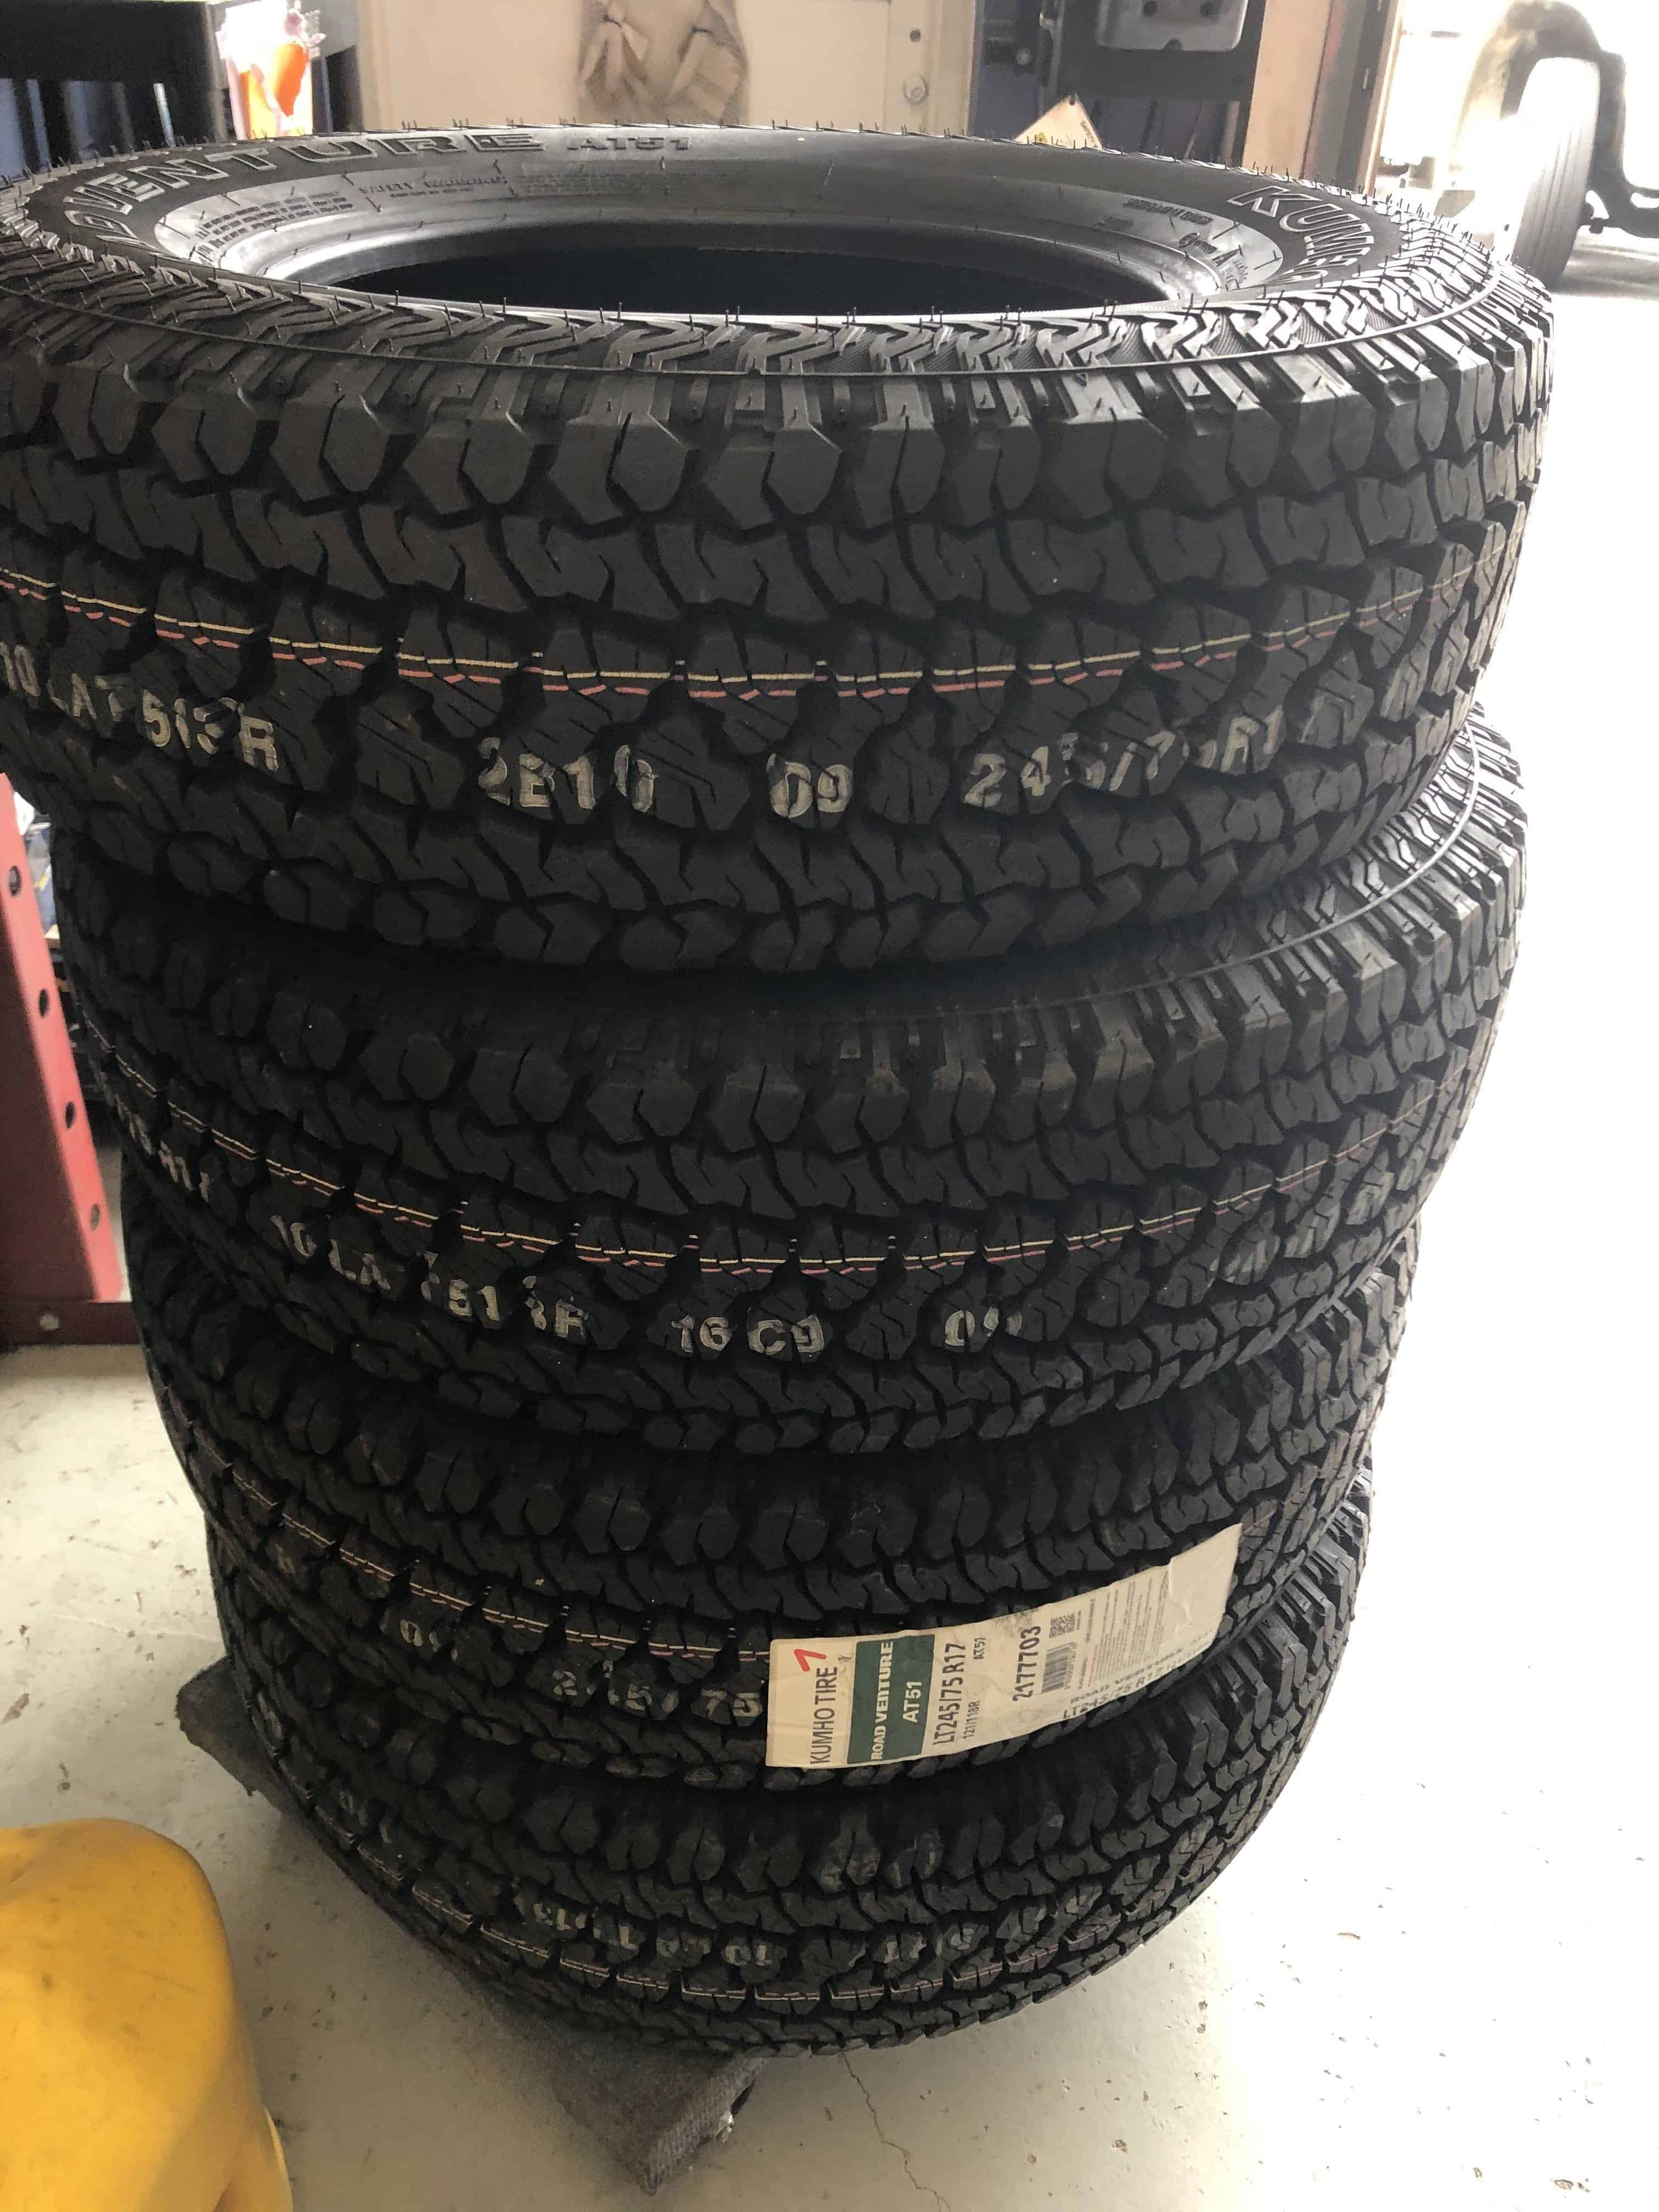 What do the Numbers on my Tires Mean?